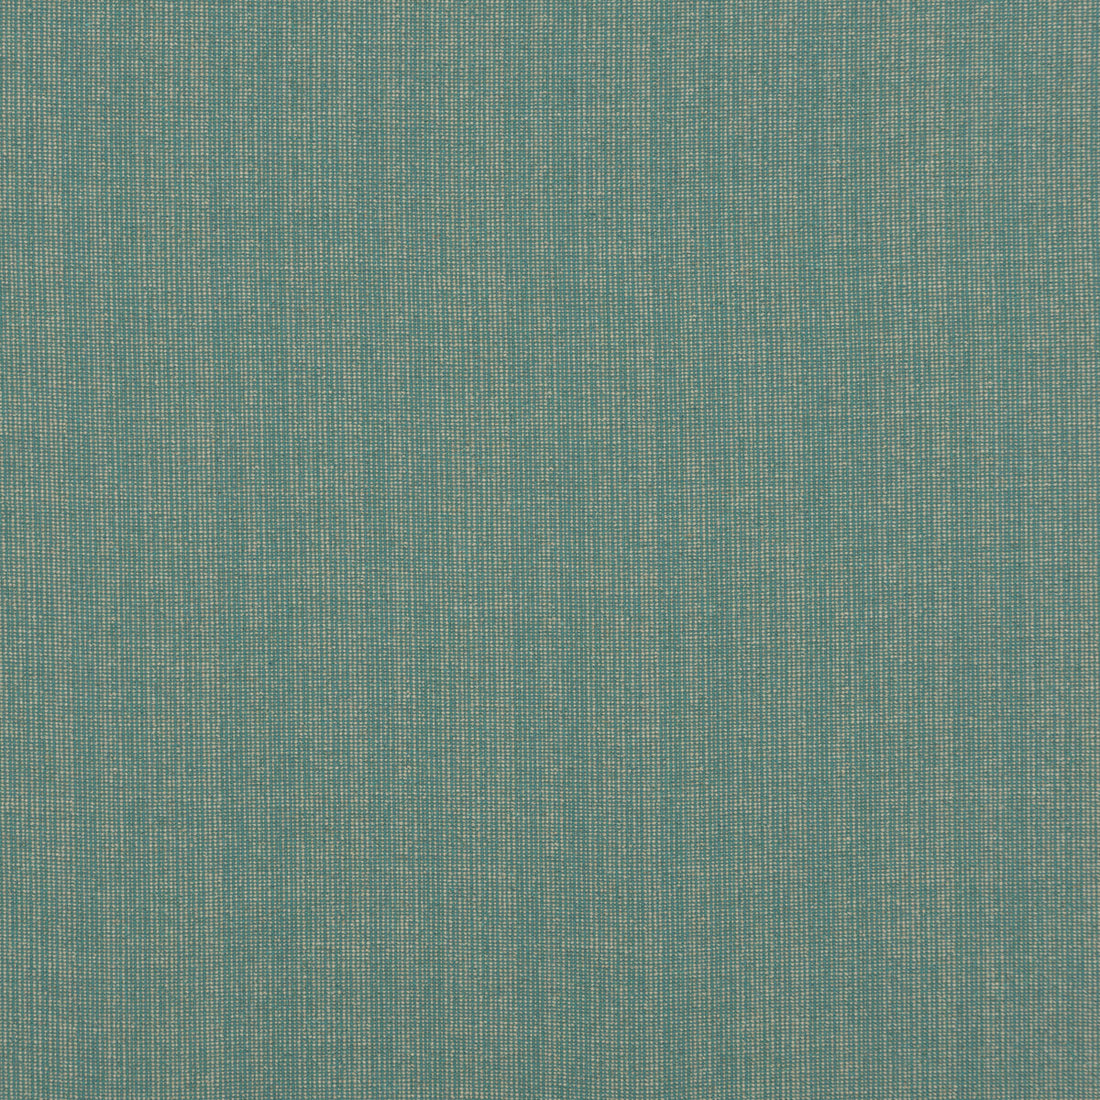 Magma fabric in verdigris color - pattern BF10682.774.0 - by G P &amp; J Baker in the Essential Colours collection